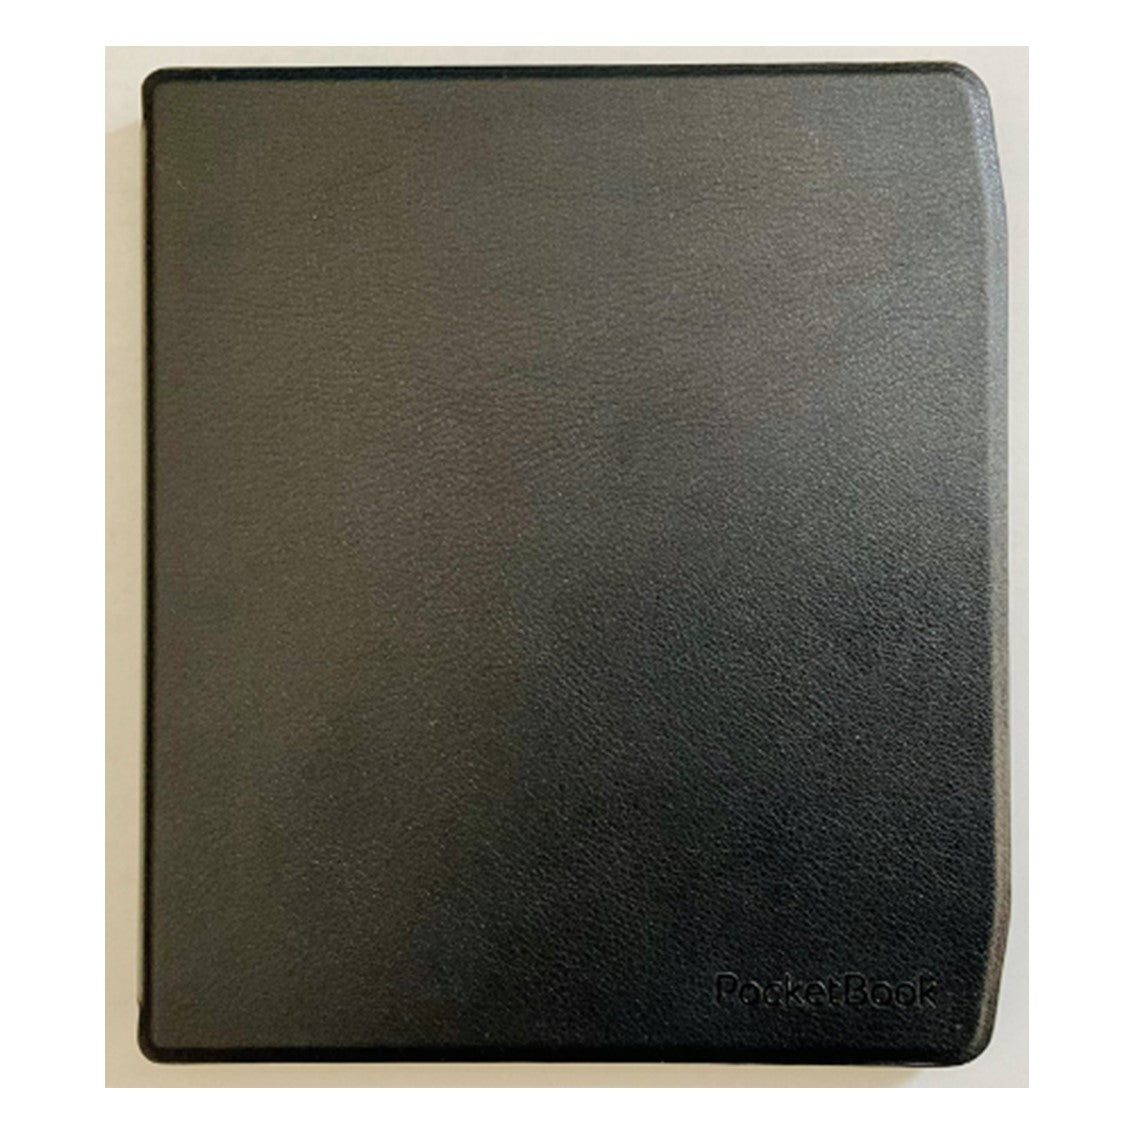 PKB 700 COVER EDITION SHELL BLACK